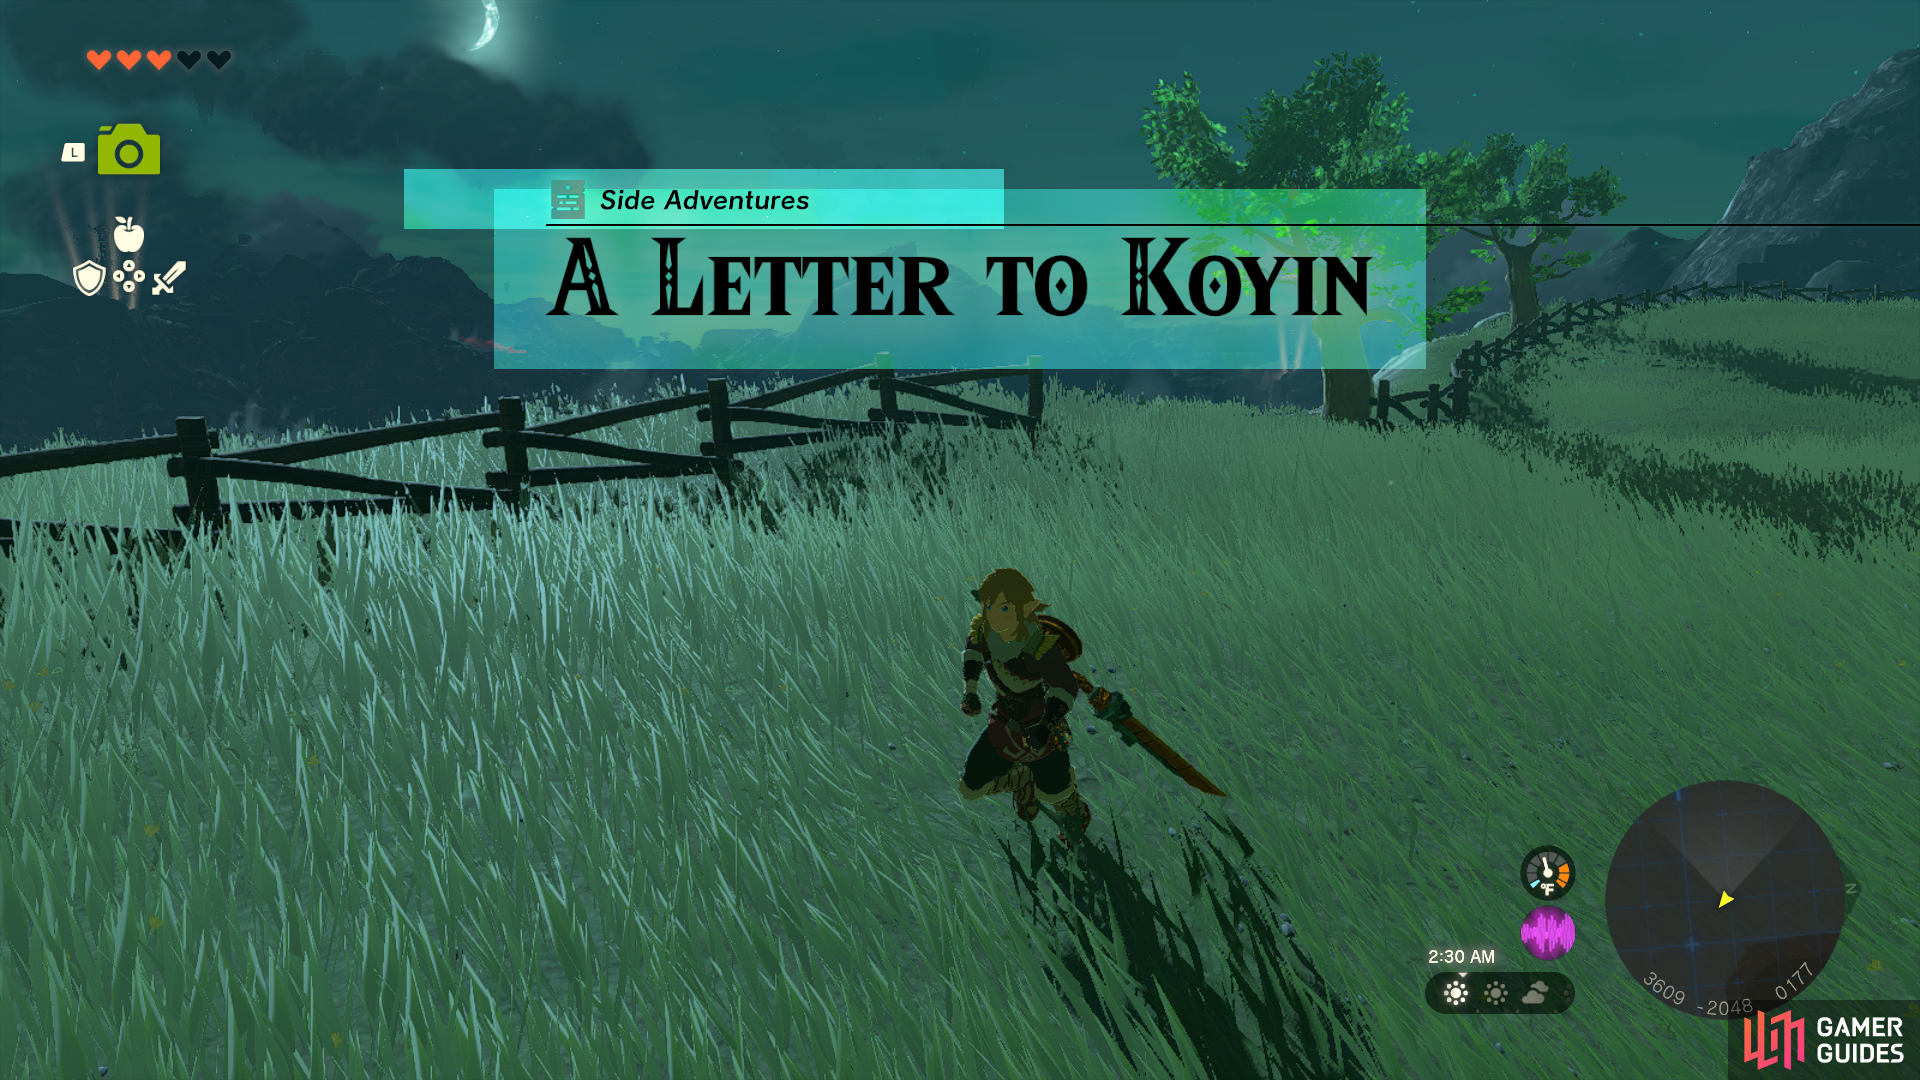 Starting the Side Adventure A Letter to Koyin.